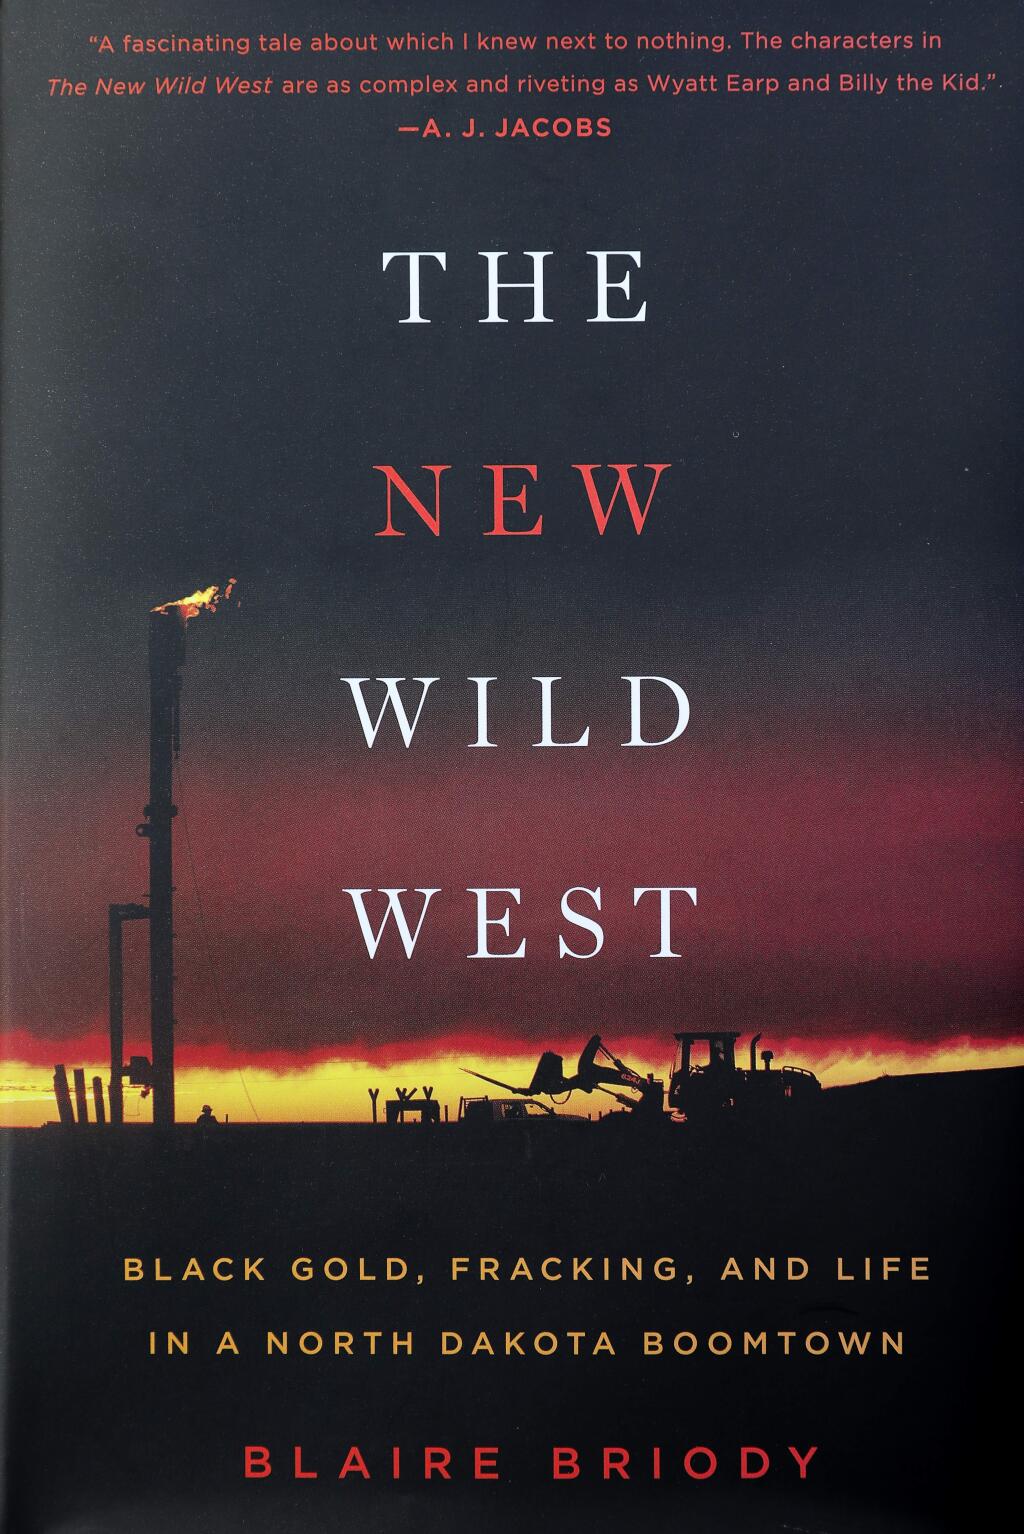 'The New Wild West: Black Gold, Fracking, and Life in a North Dakota Boomtown' by Blaire Briody.(Christopher Chung/ The Press Democrat)